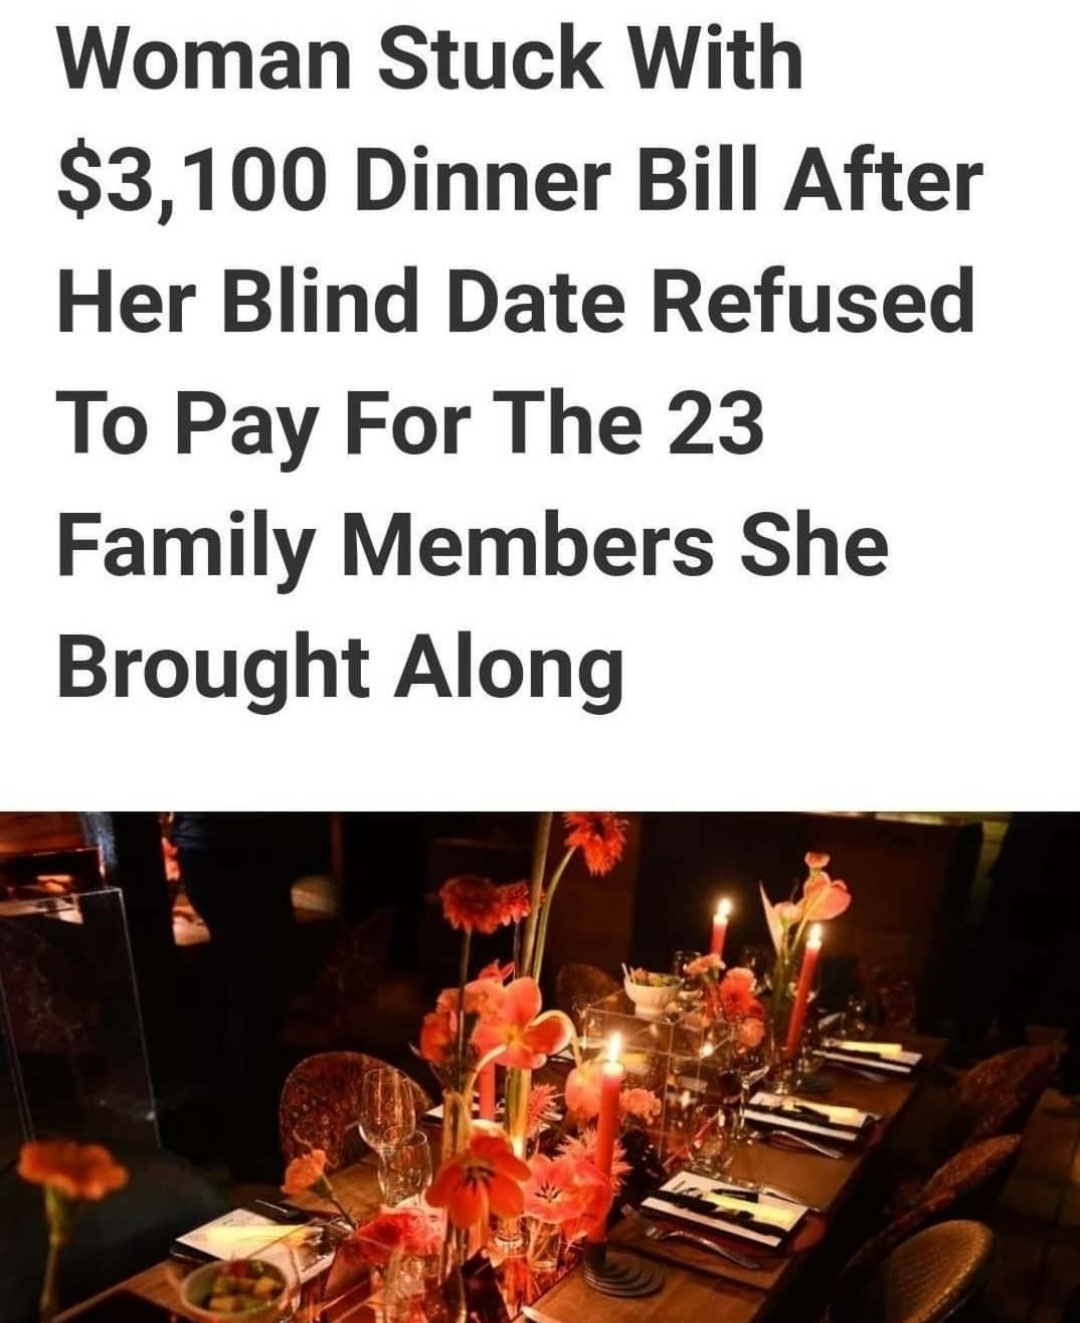 funny memes - woman stuck with 3100 bill after blind date - Woman Stuck With $3,100 Dinner Bill After Her Blind Date Refused To Pay For The 23 Family Members She Brought Along